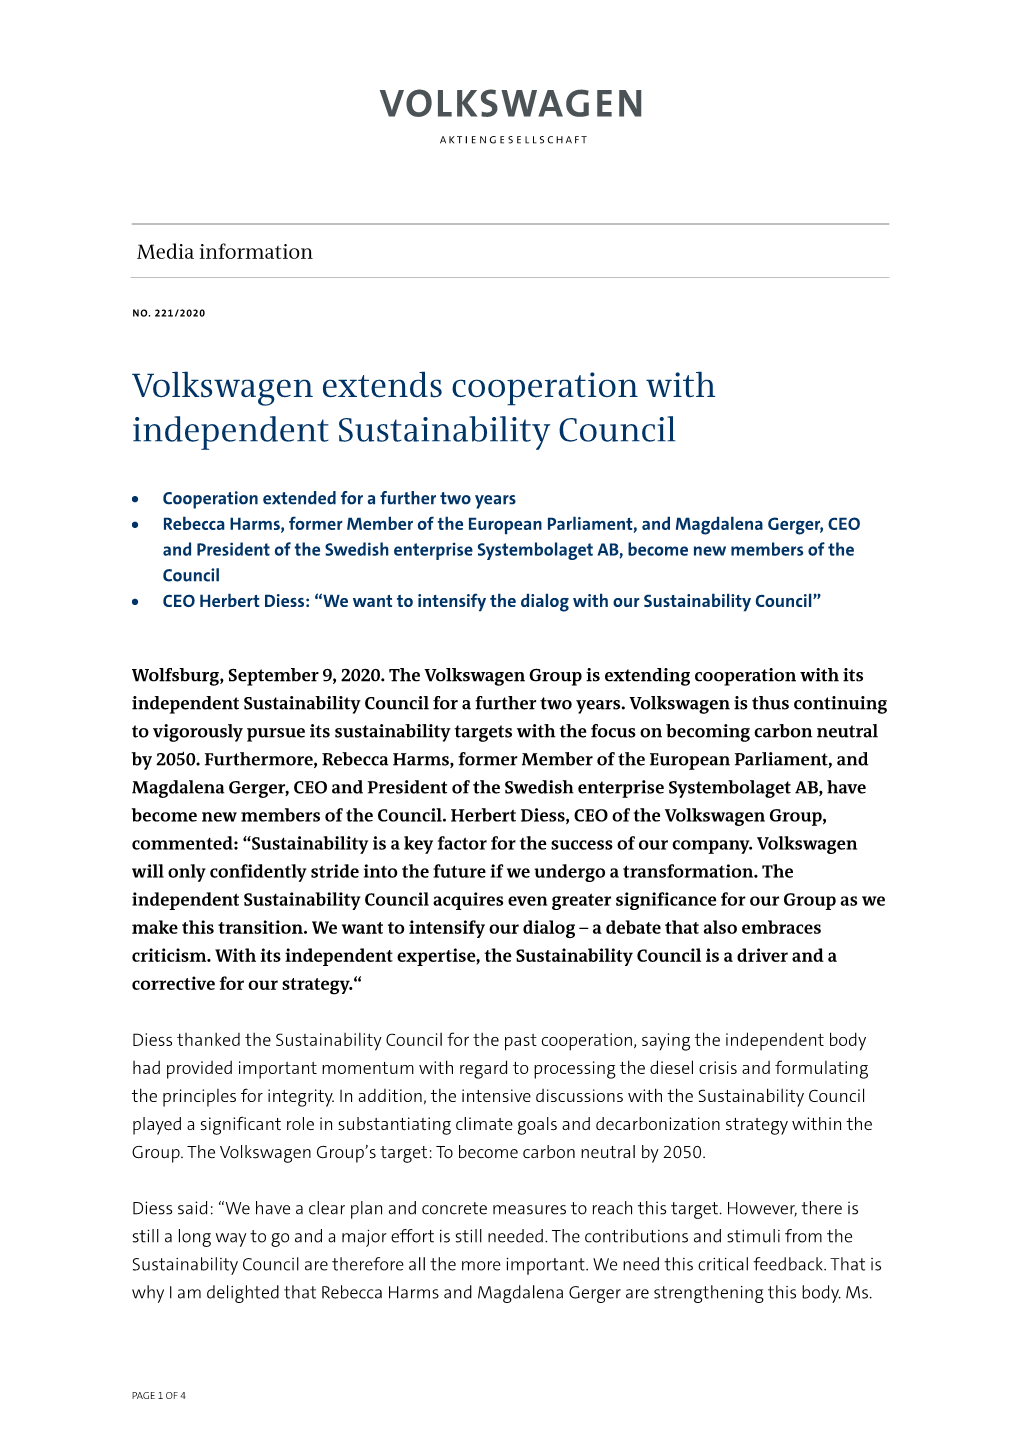 Volkswagen Extends Cooperation with Independent Sustainability Council